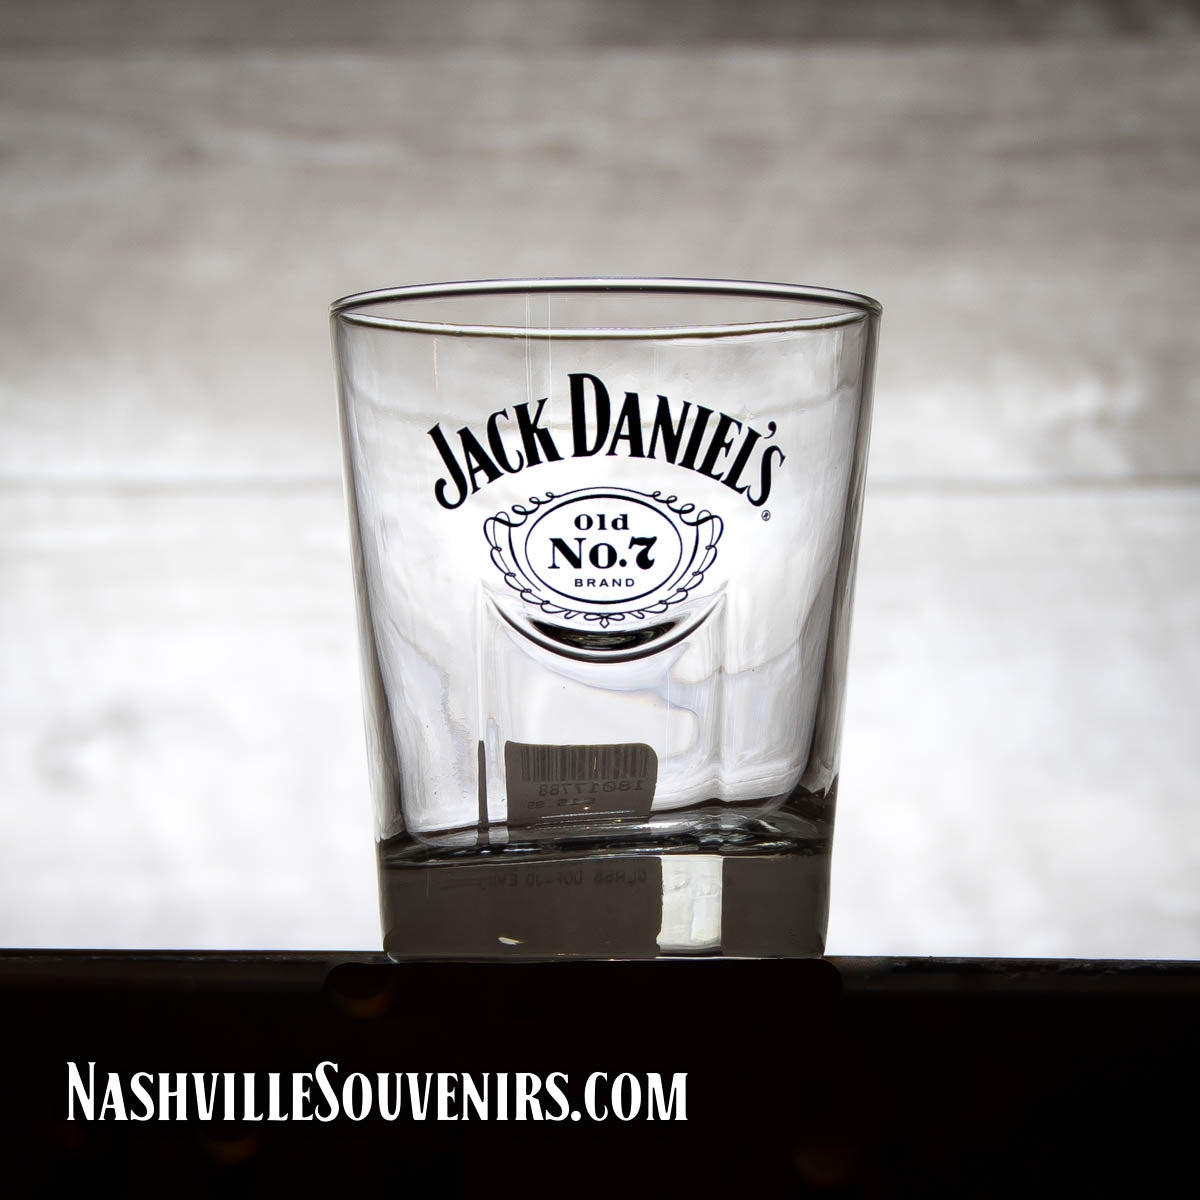 Officially licensed Jack Daniels "Swing Logo" Rocks Glass. FREE SHIPPING on all US orders over $75!